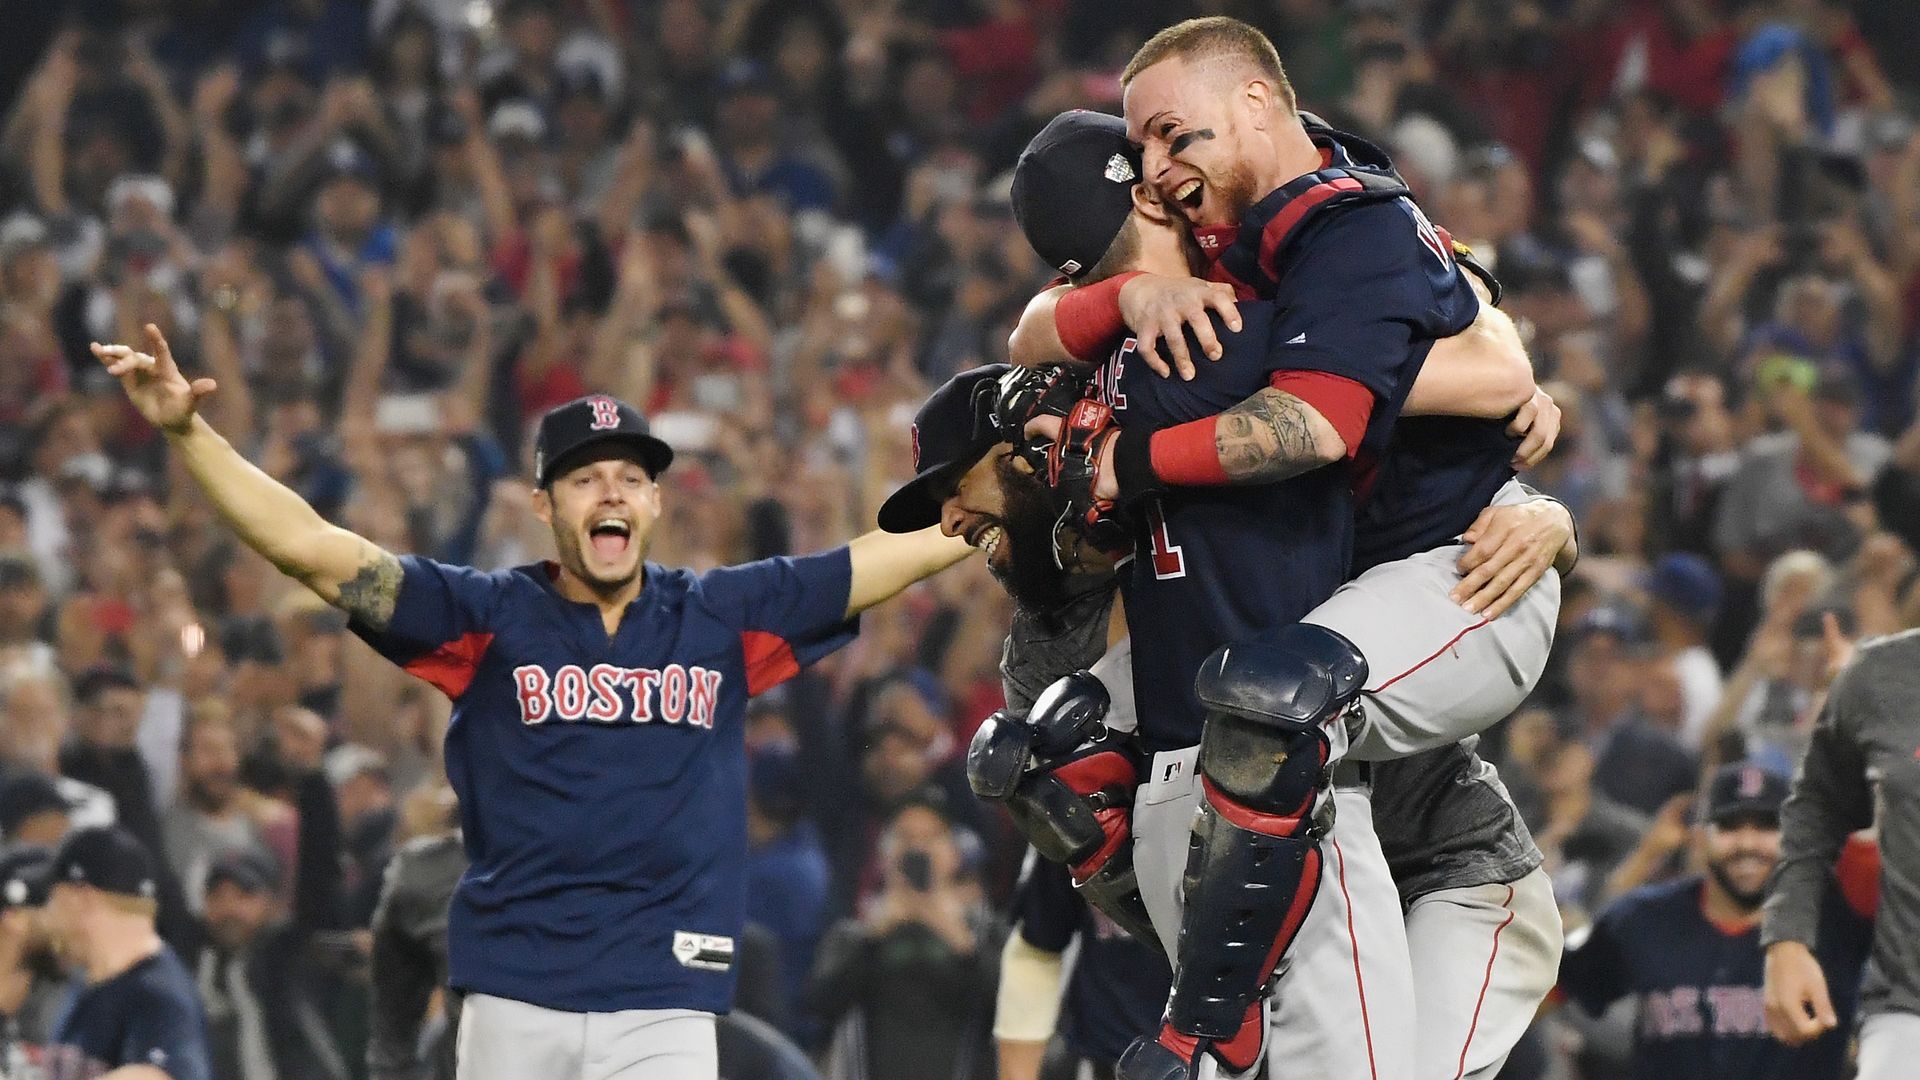 Red Sox players after winning the World Series